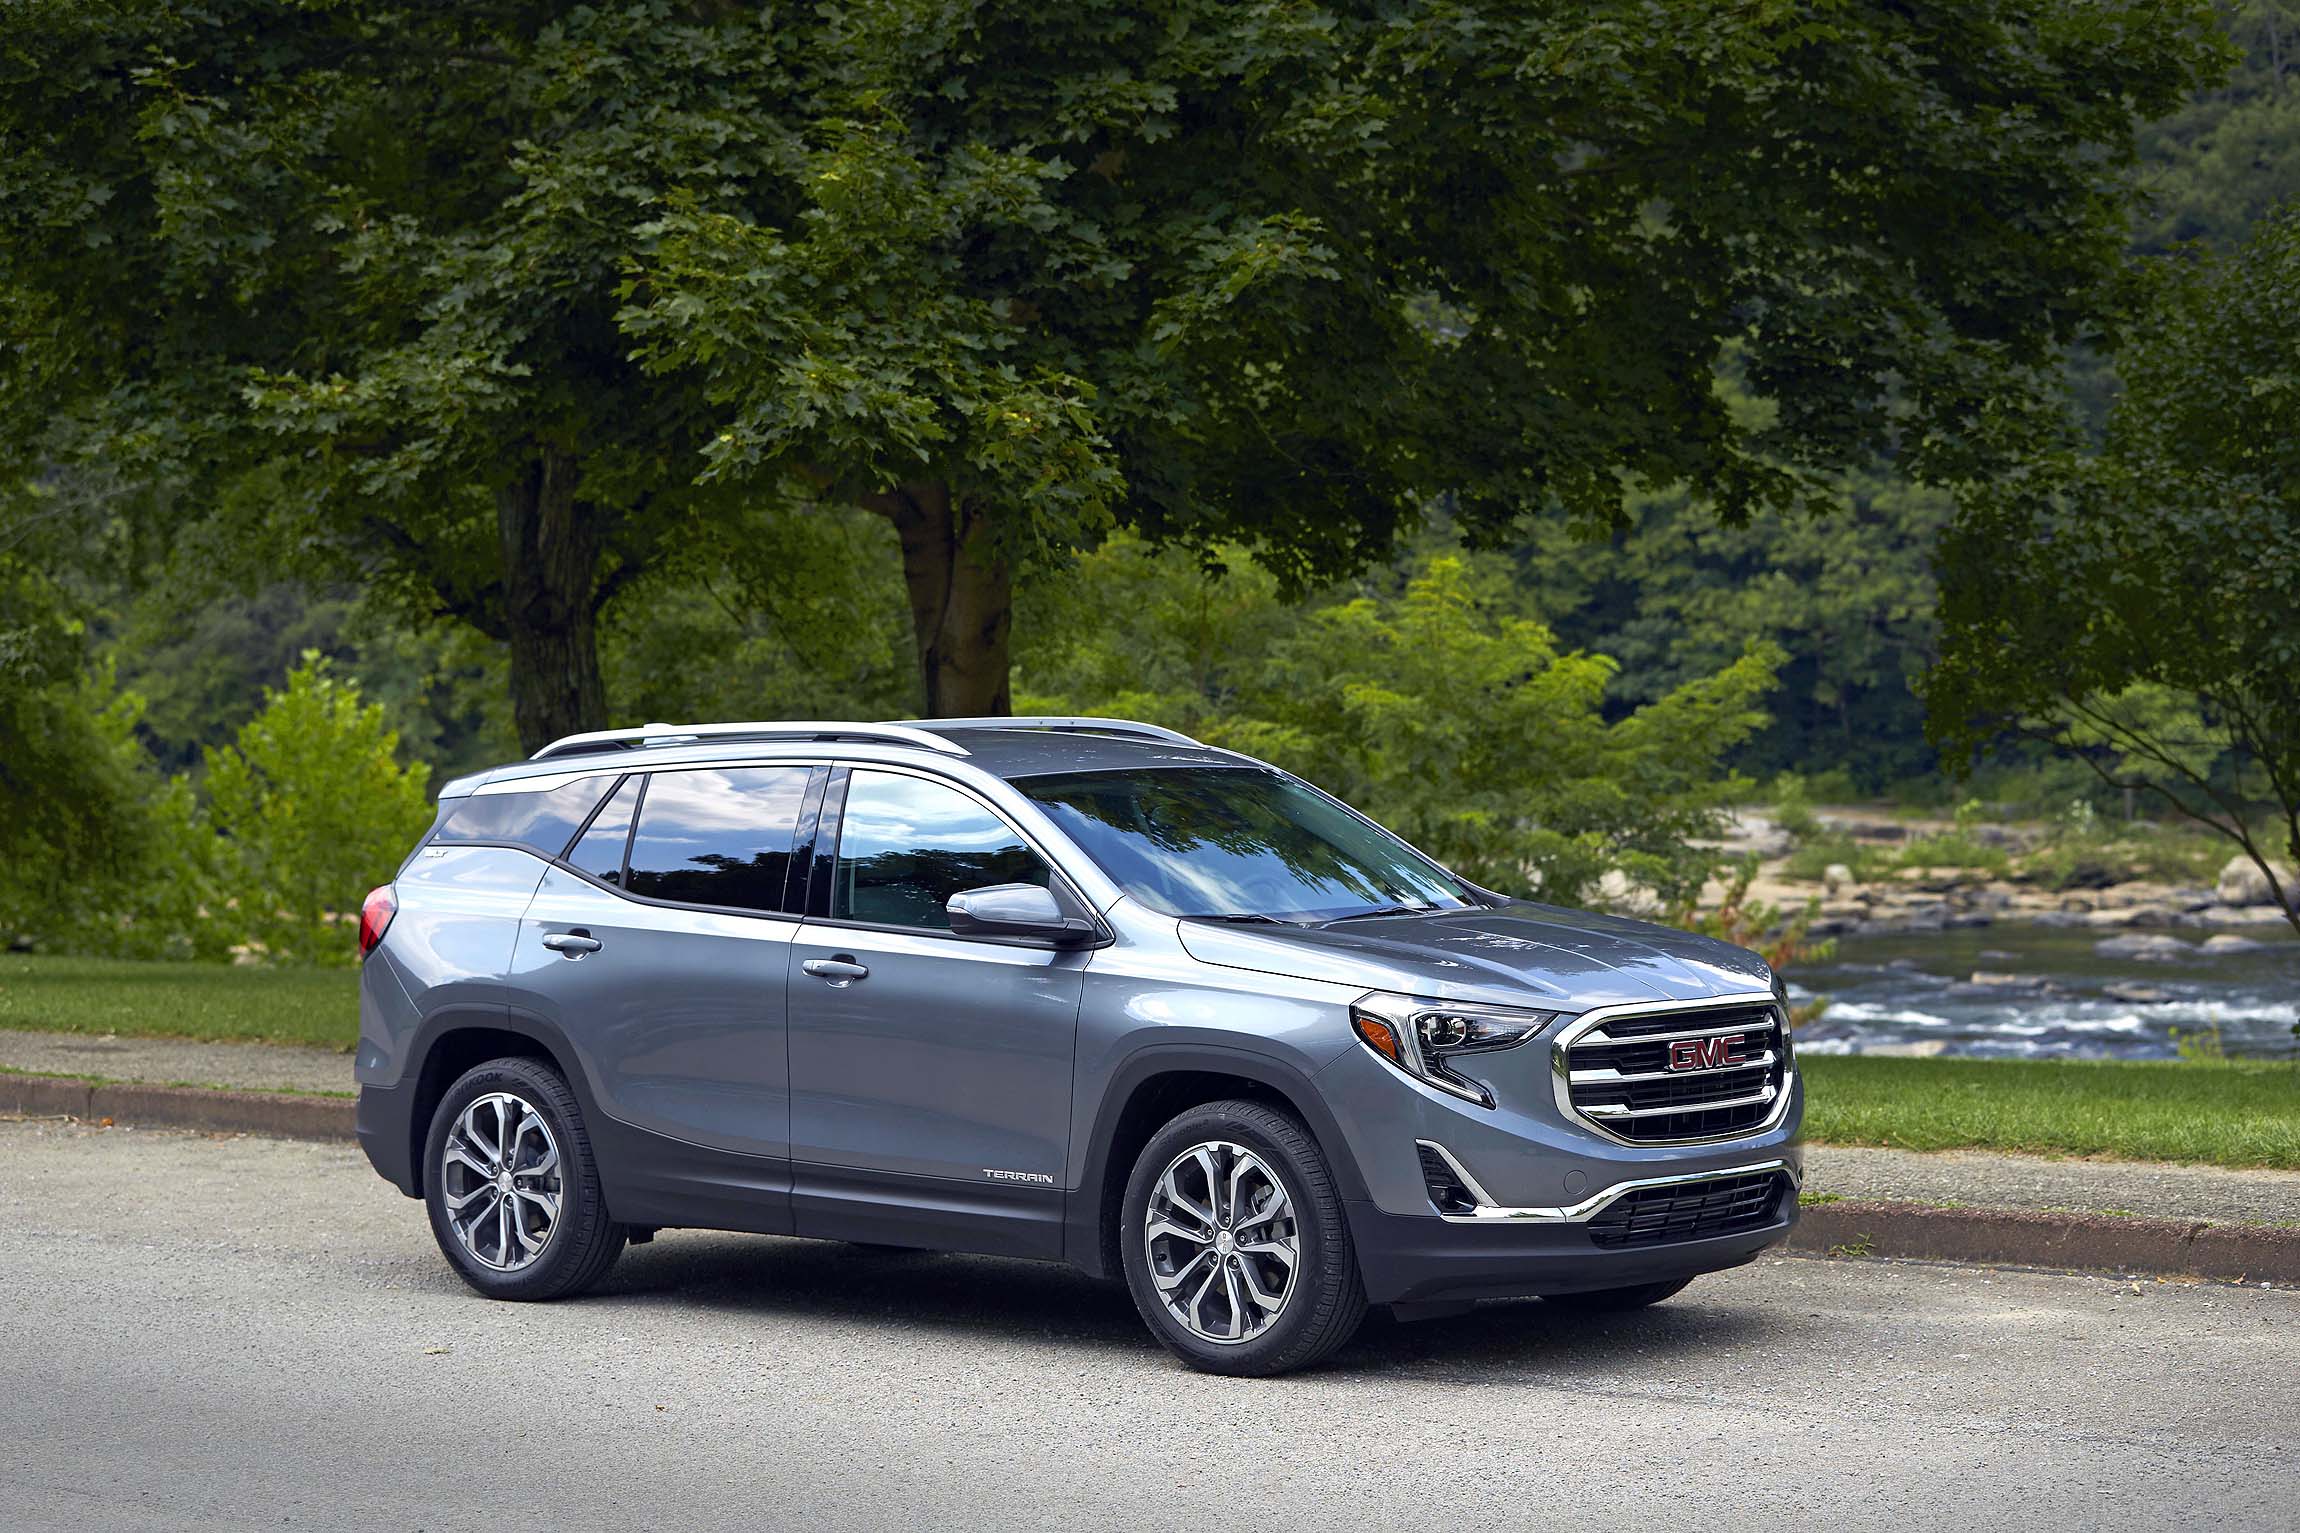 2020 GMC Terrain prices and expert review - The Car Connection